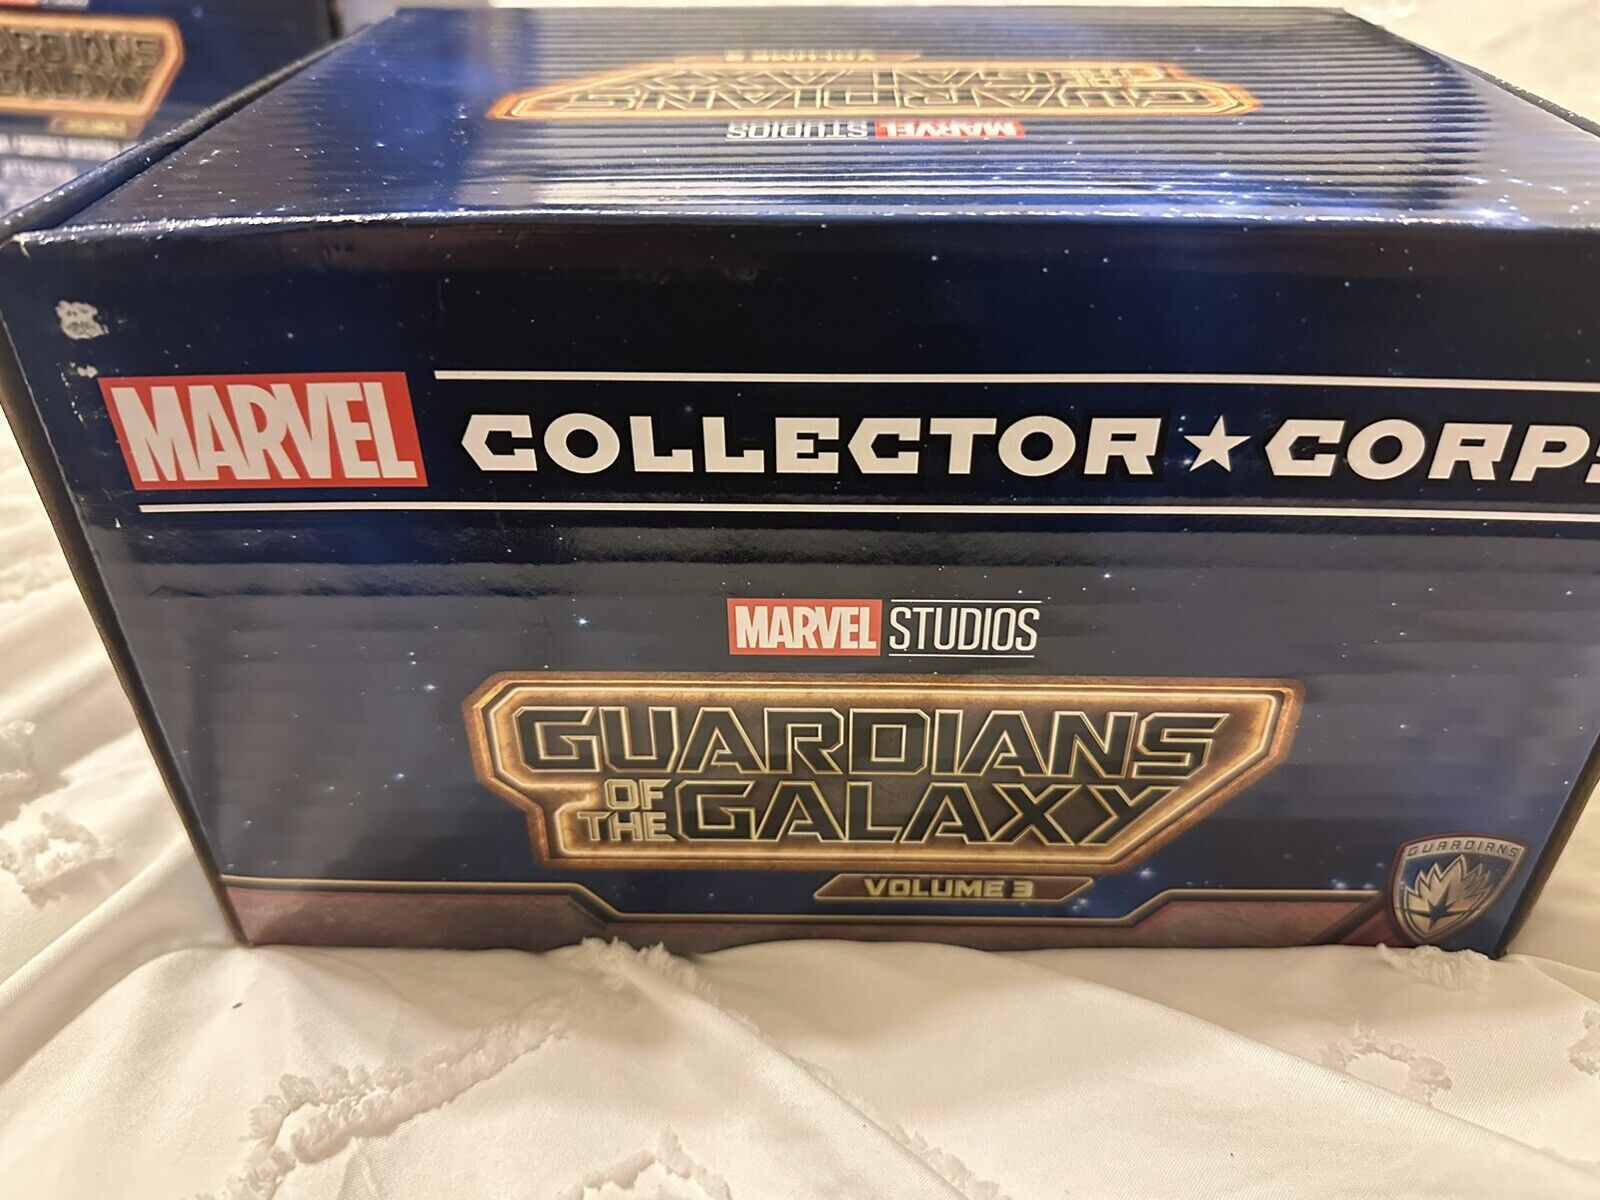 Marvel Collector Corps Guardians Of The Galaxy Vol 3 Funko Box 5pcs Size XS